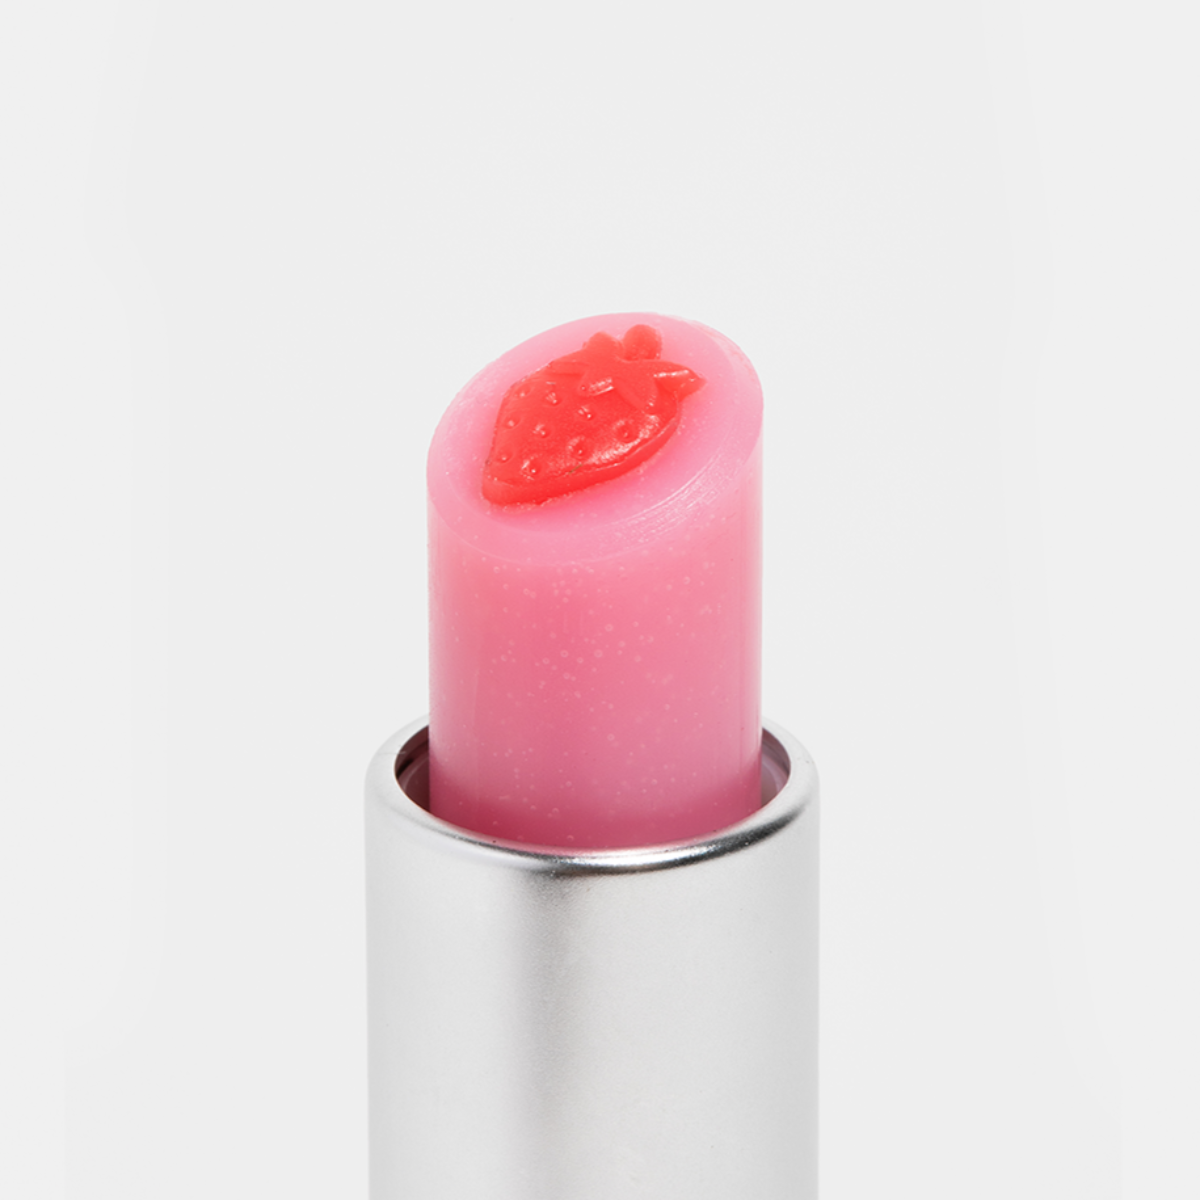 Strawberry Mood Fruit™ Lip Therapy